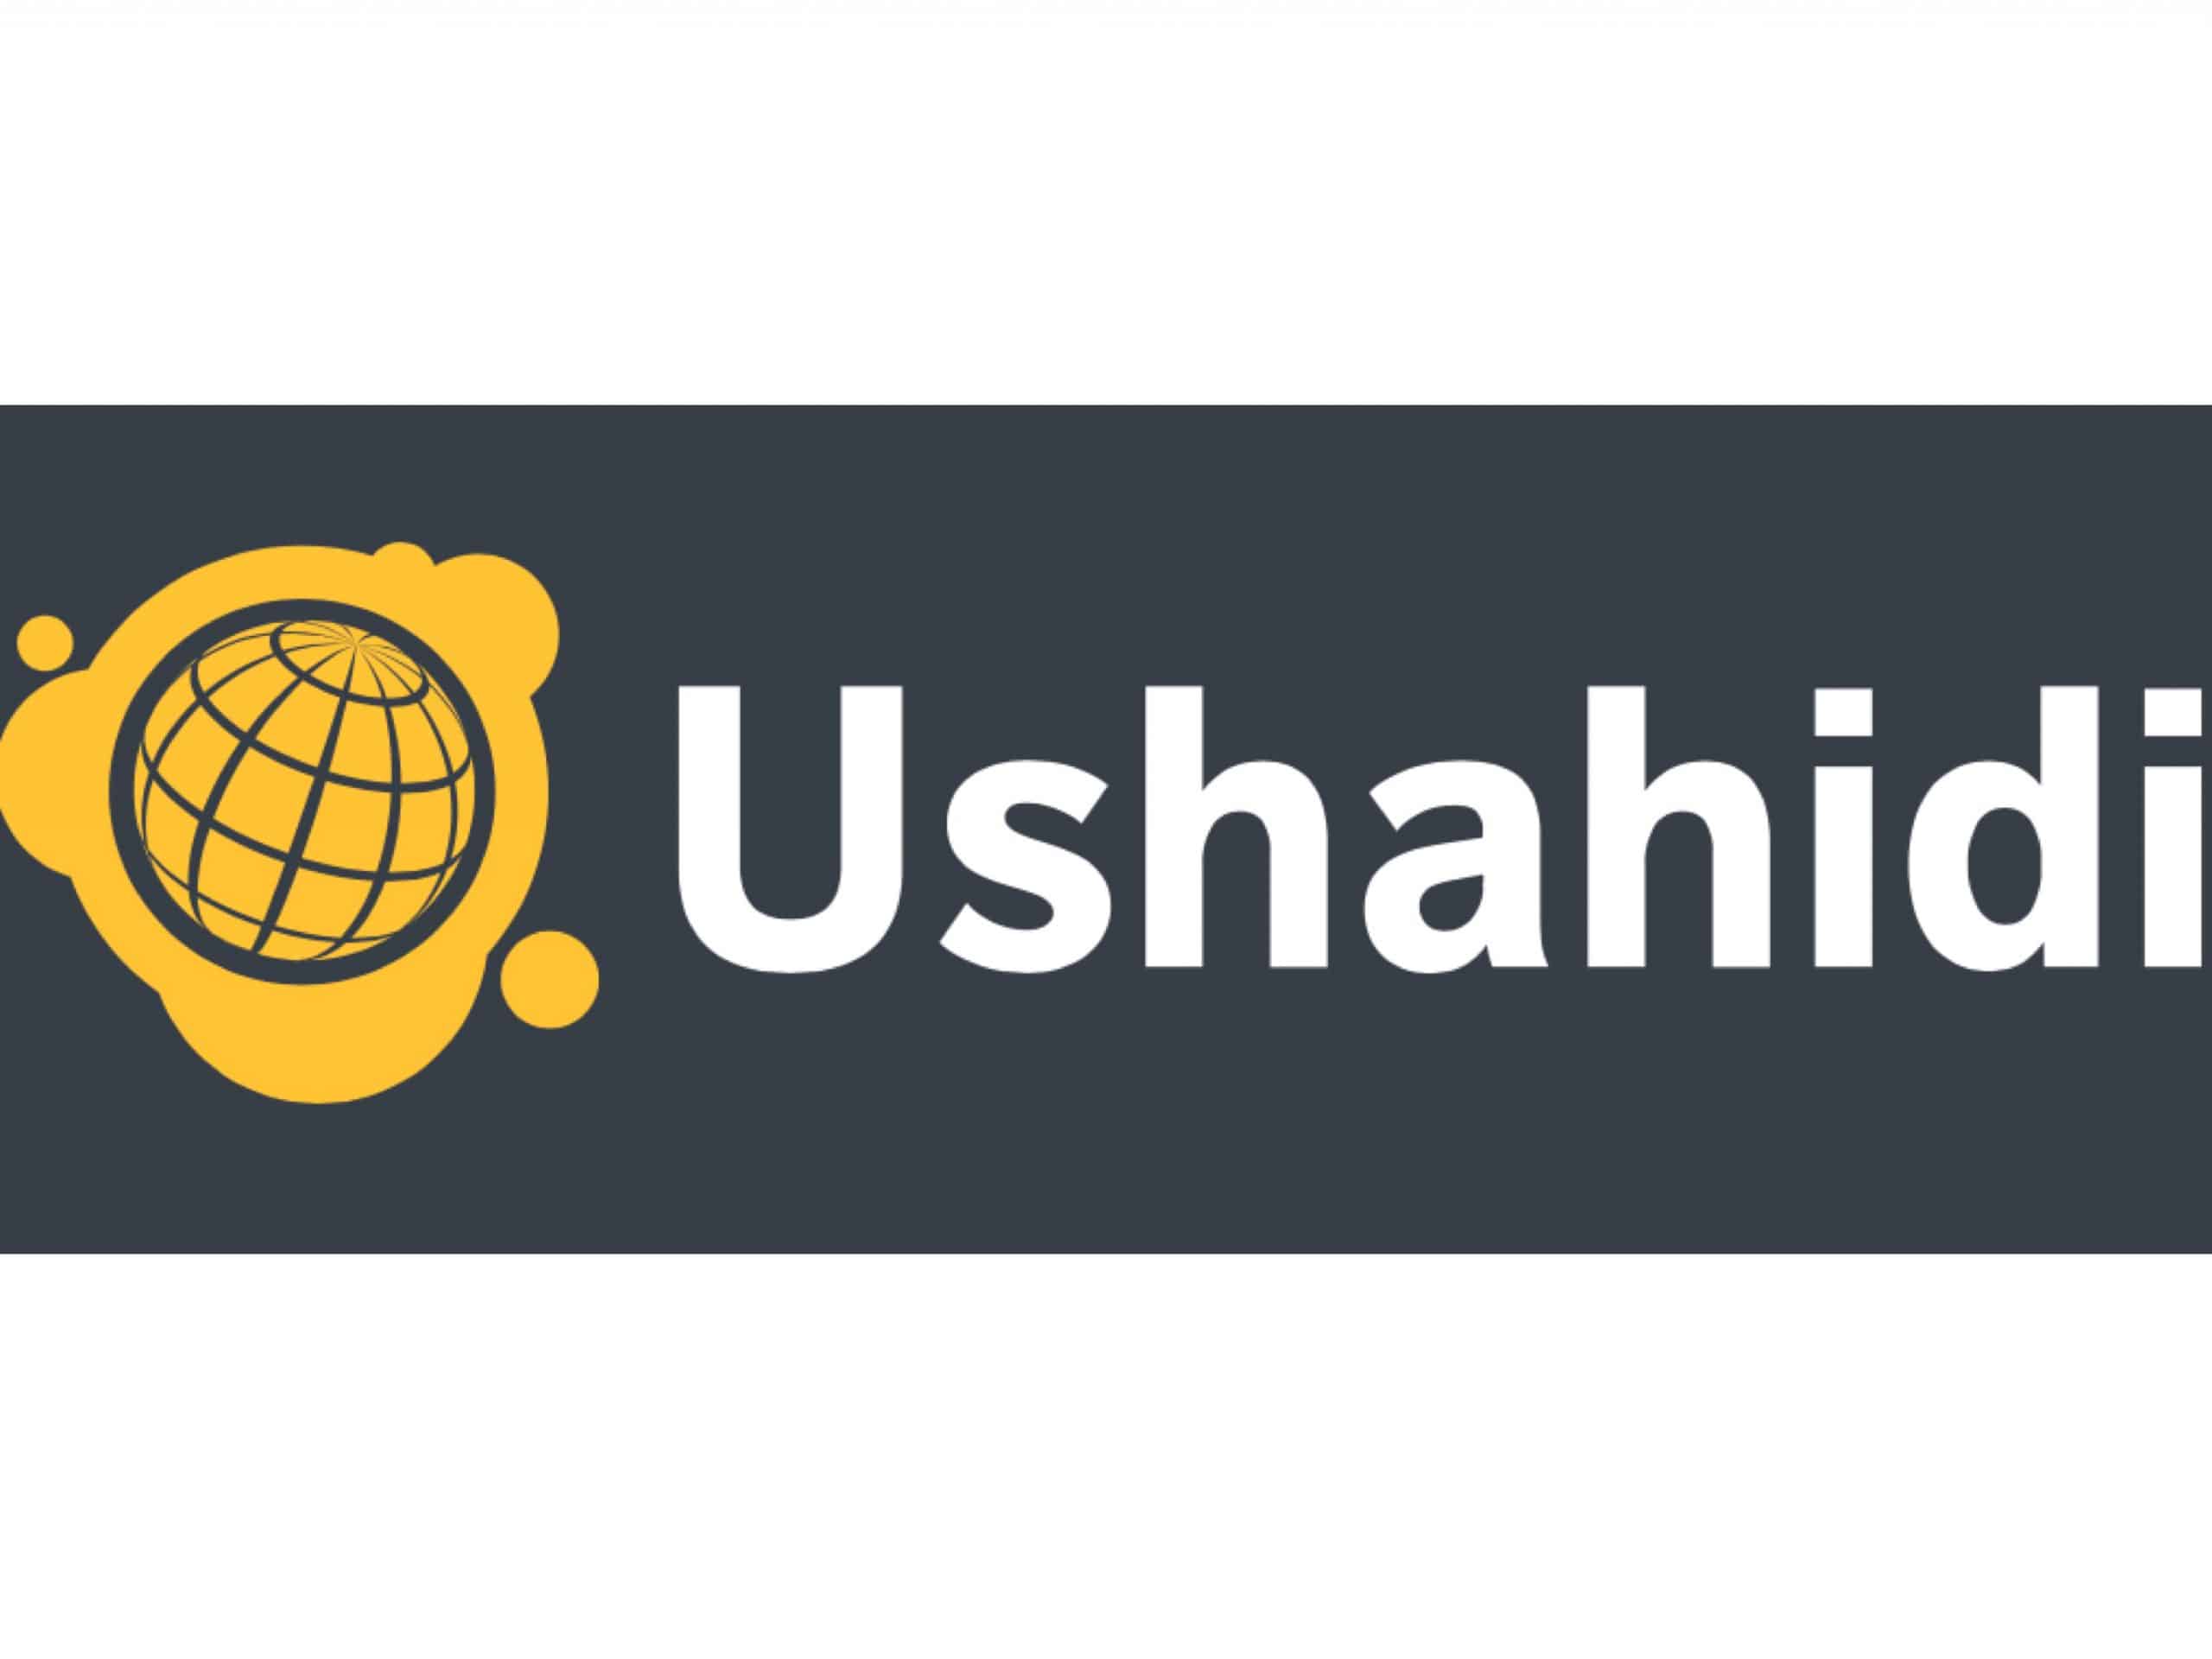 Ushahidi’s sex scandal is a cautionary tale for the new age and the work ahead of all of us